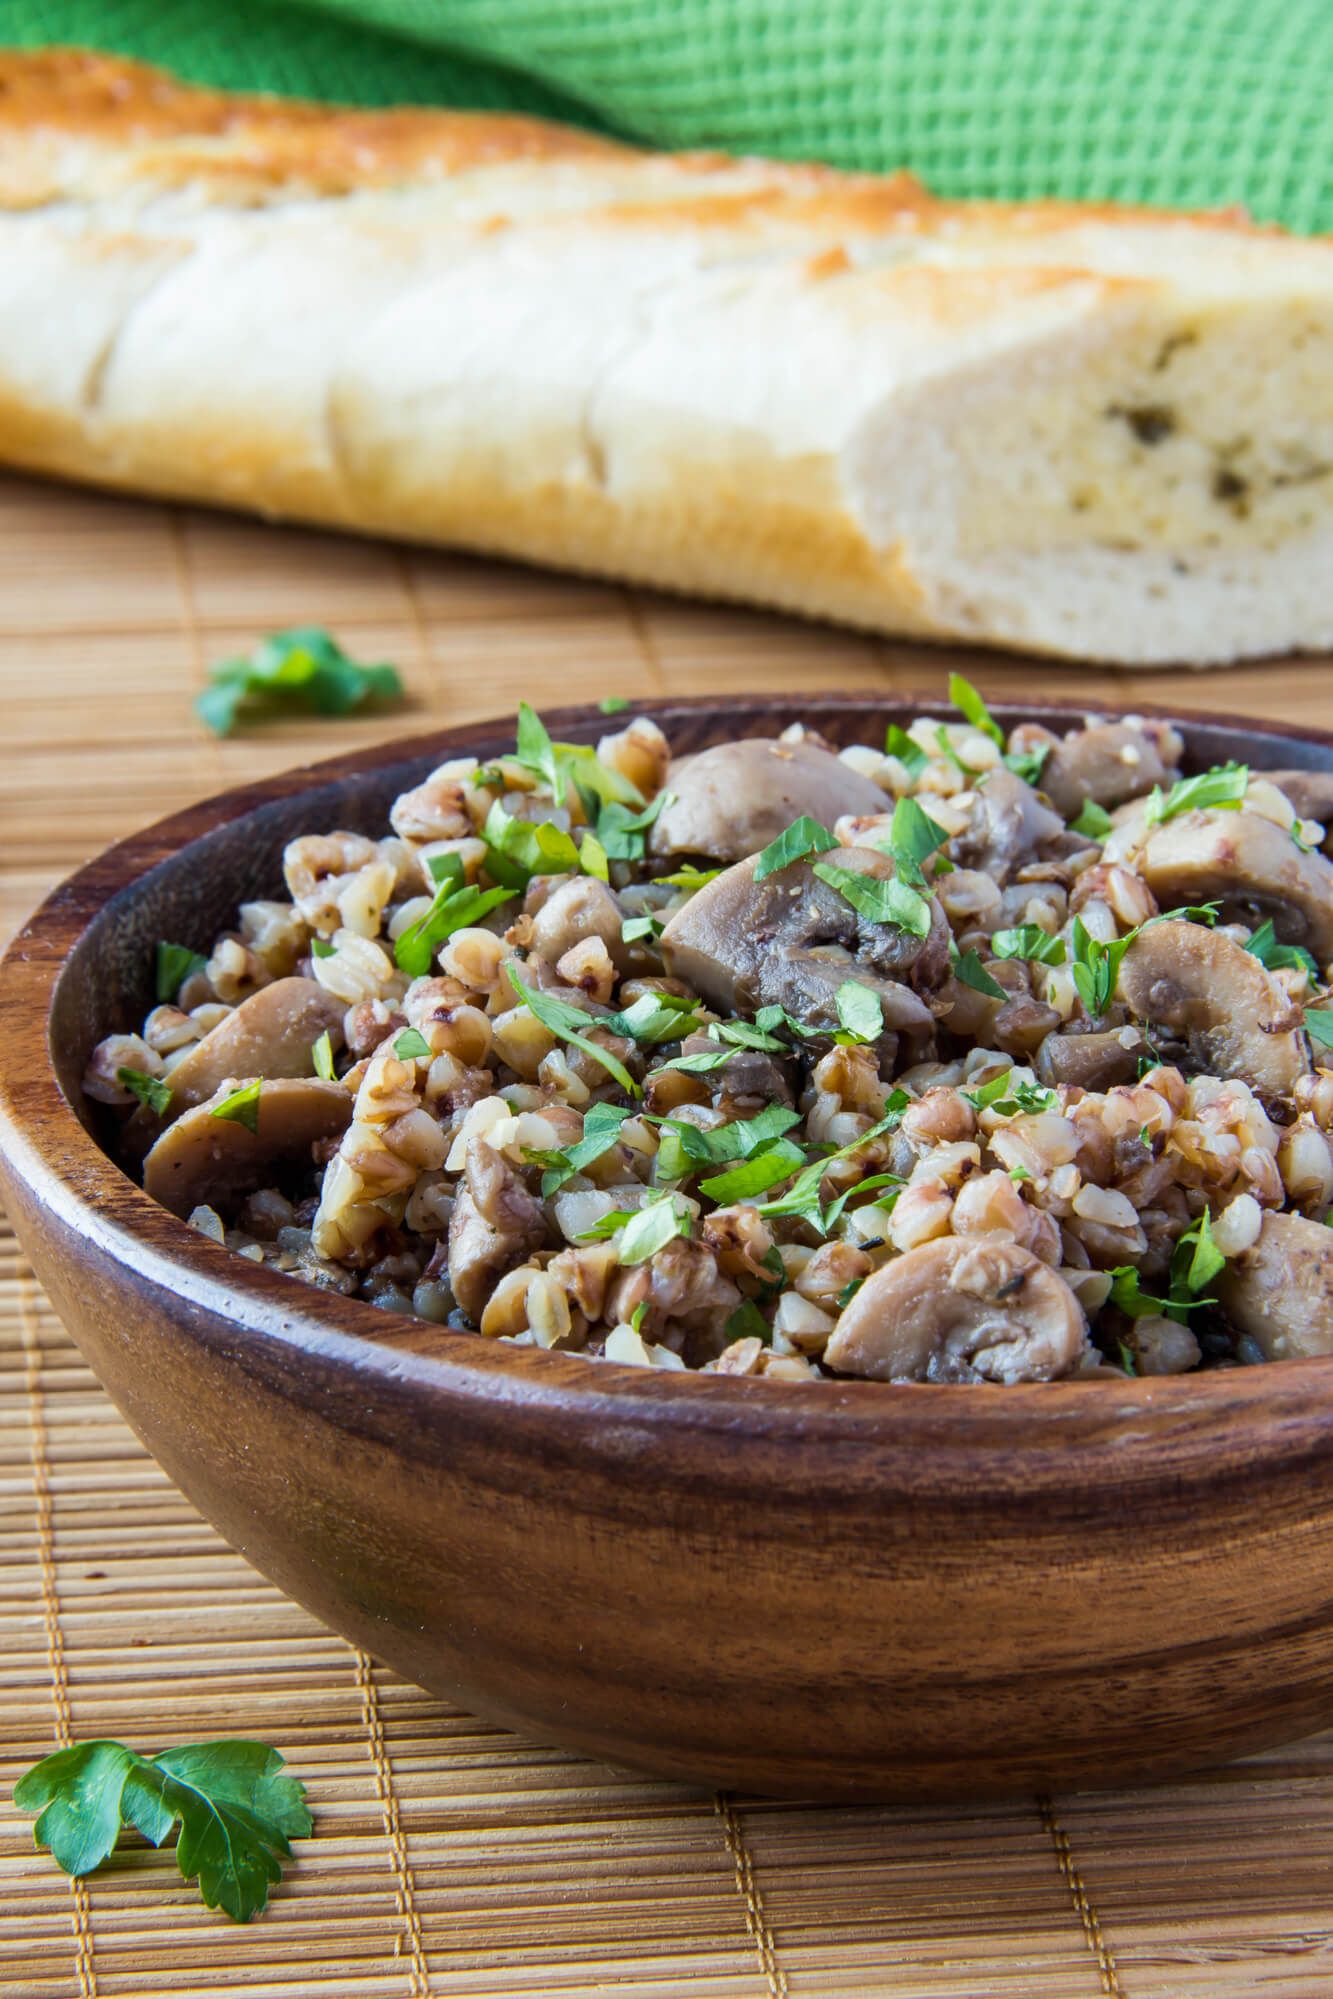 Mushroom barley bowls with tender mushrooms and barley in a bowl with garlic bread on the side.